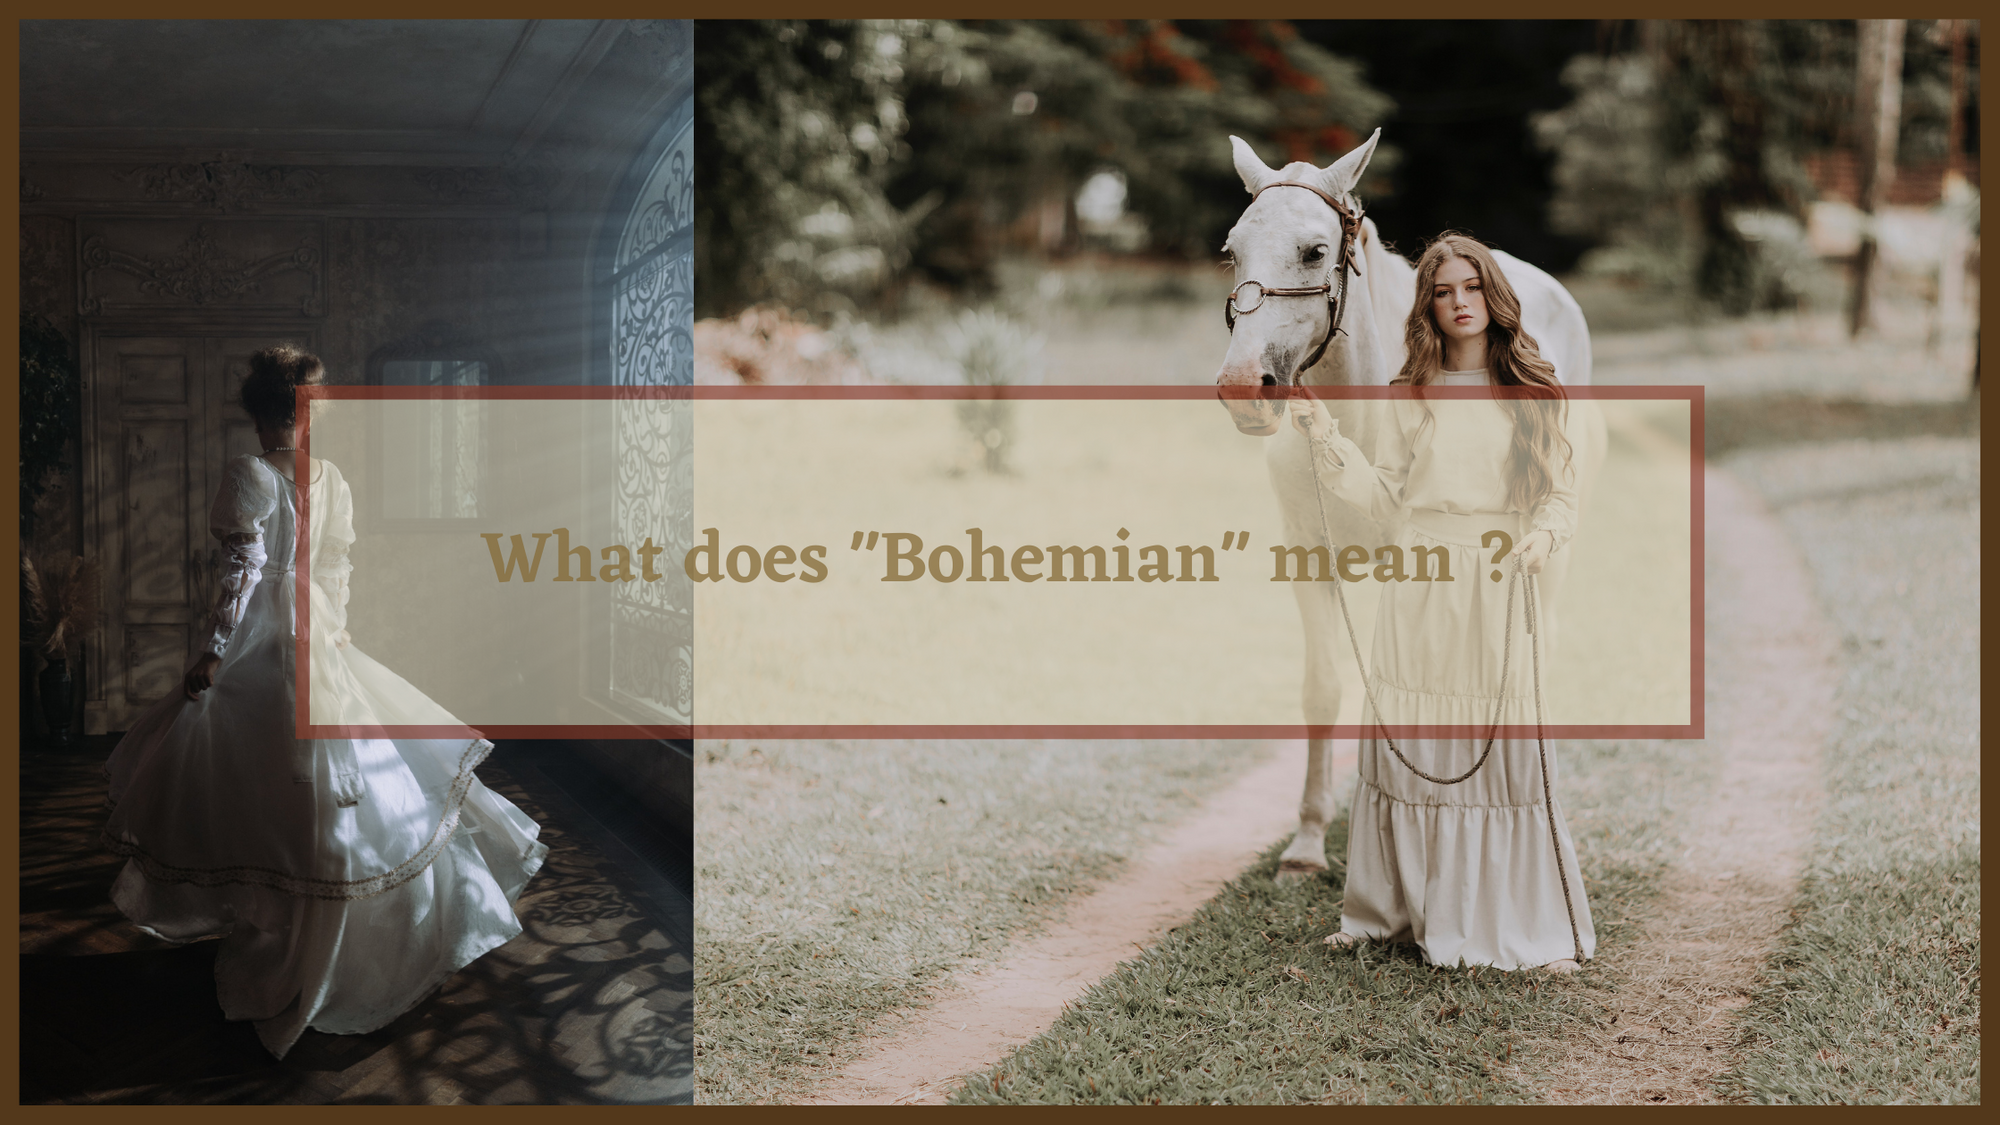 What does "Bohemian" mean?